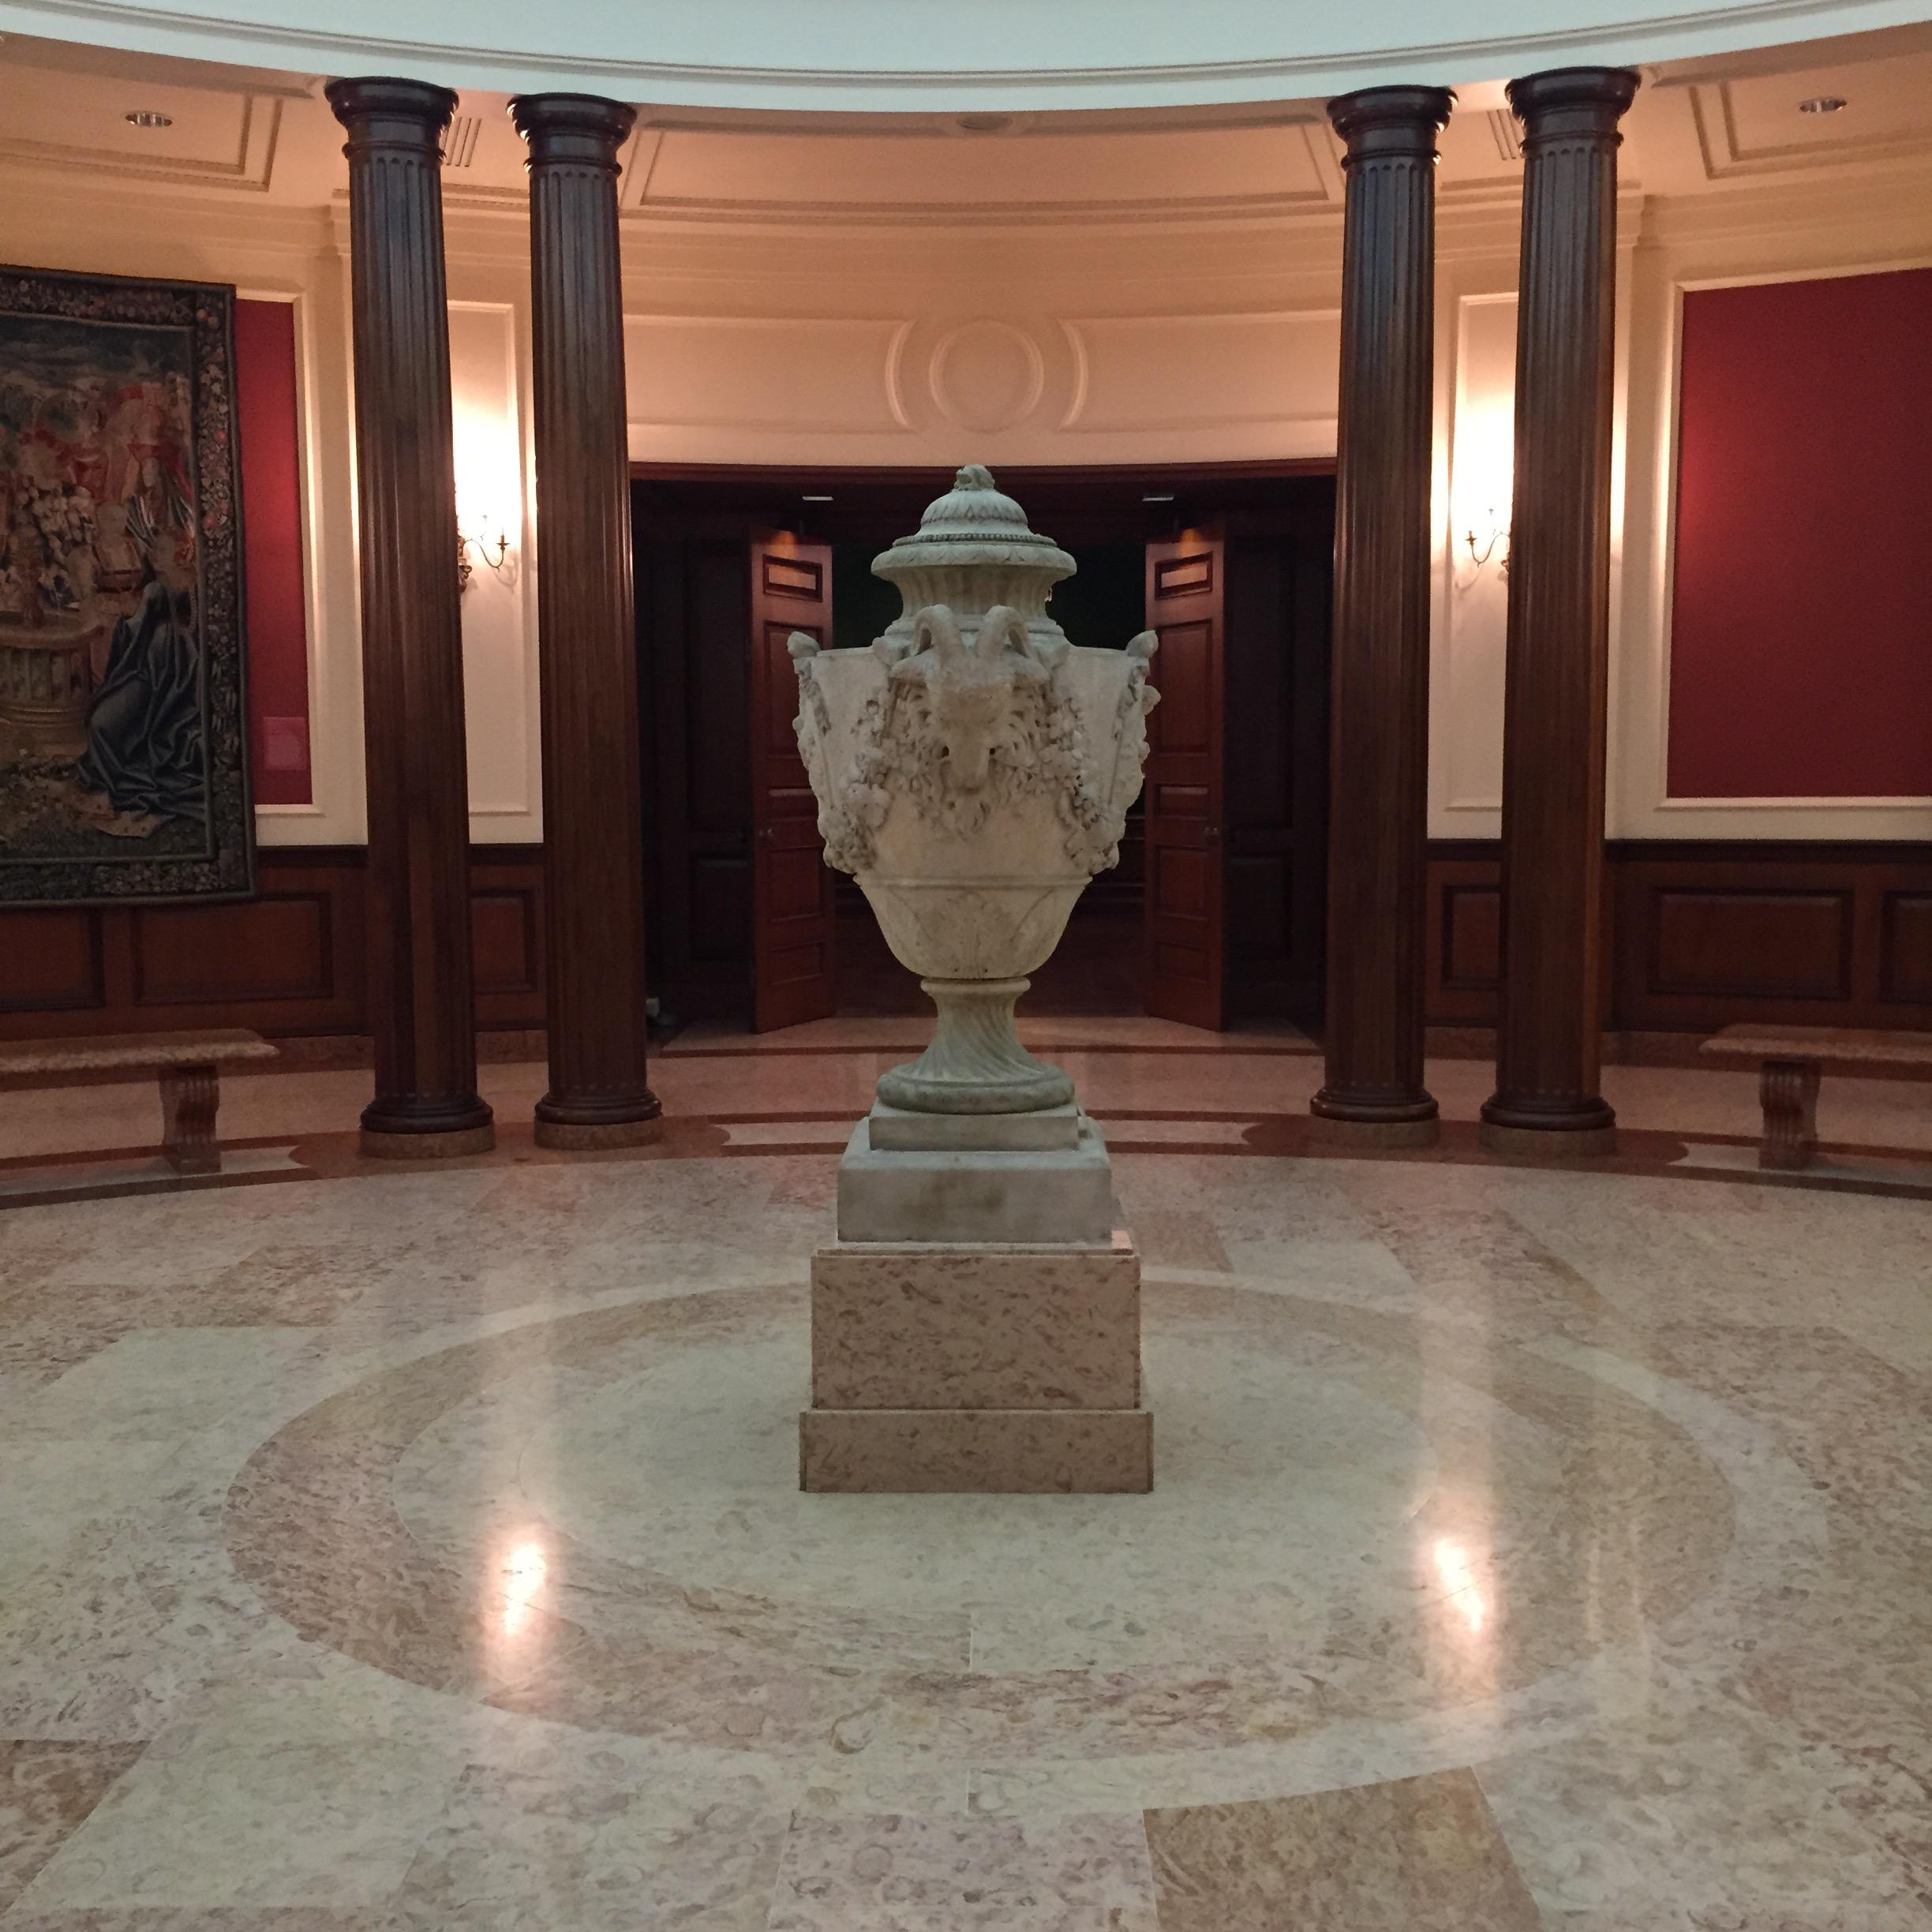 Cover image of this place The Frick Art And Historical Center